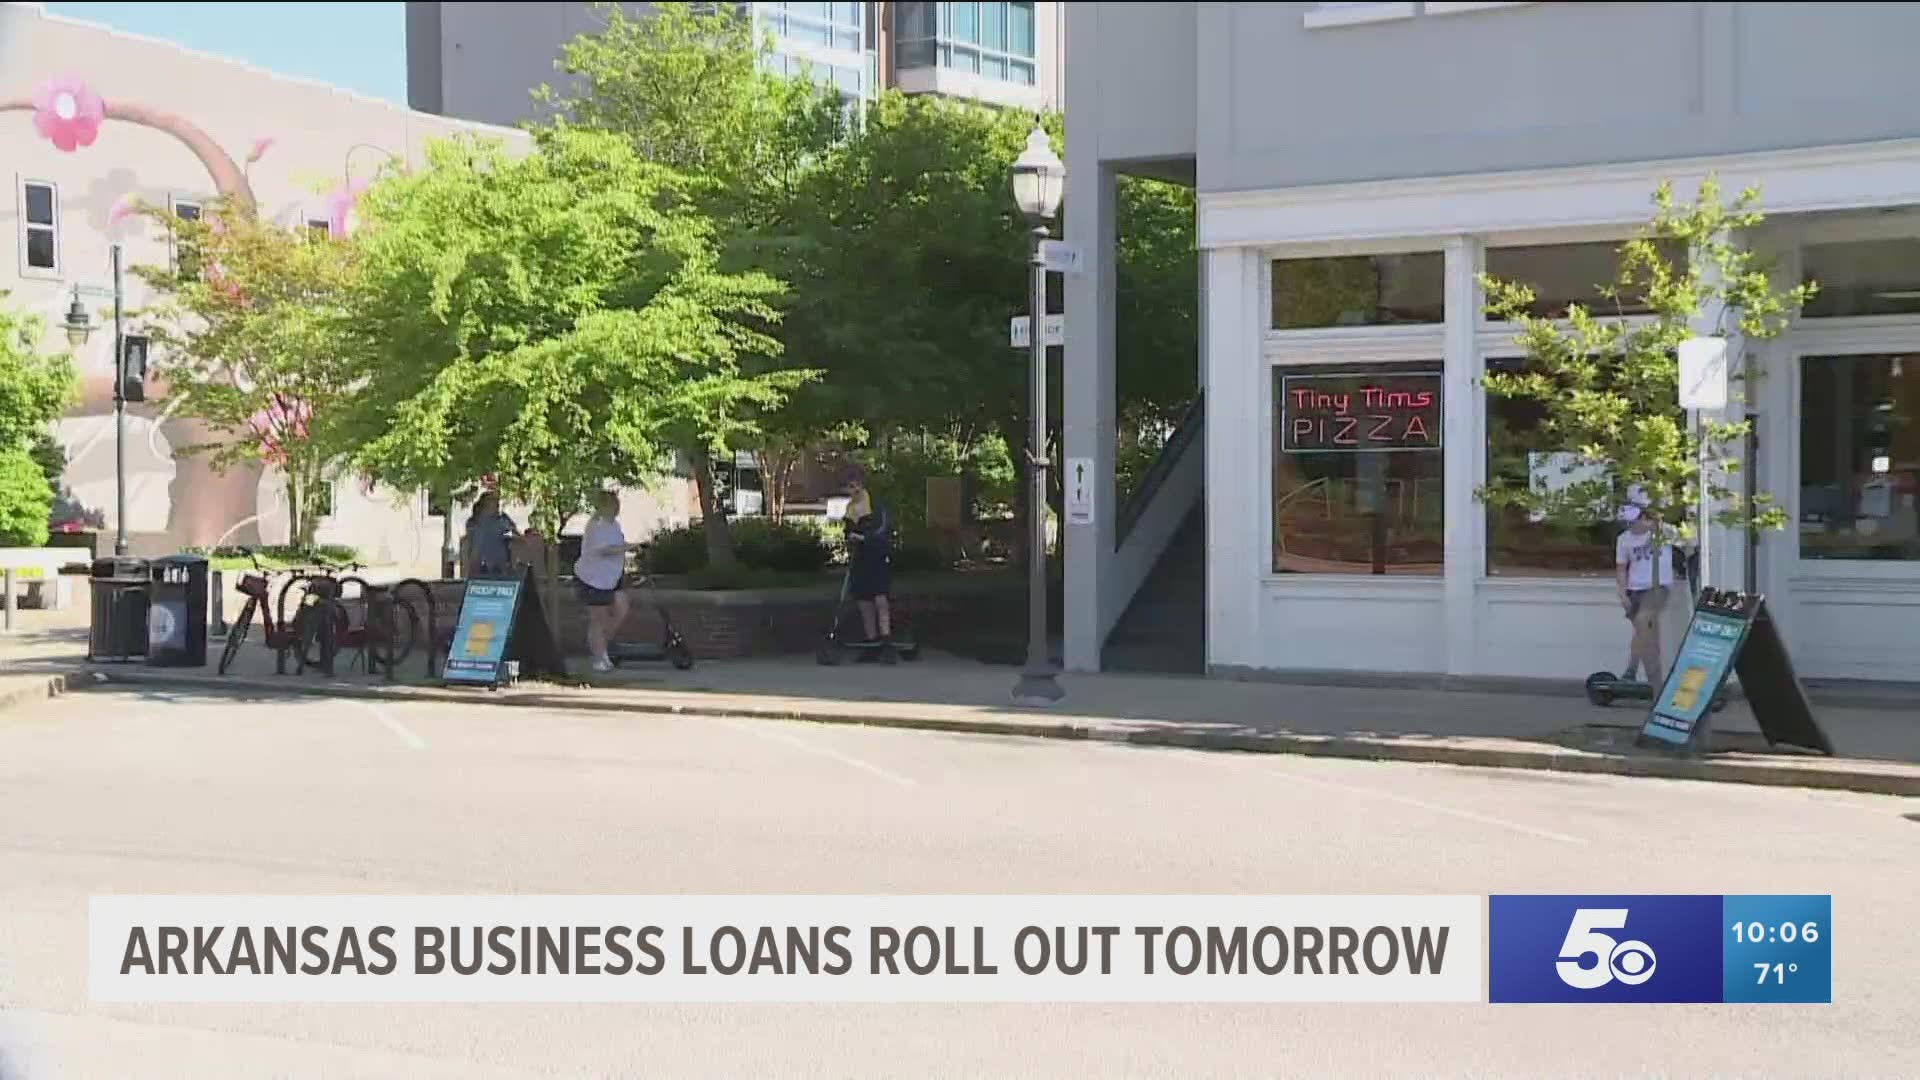 Arkansas business loans roll out tomorrow